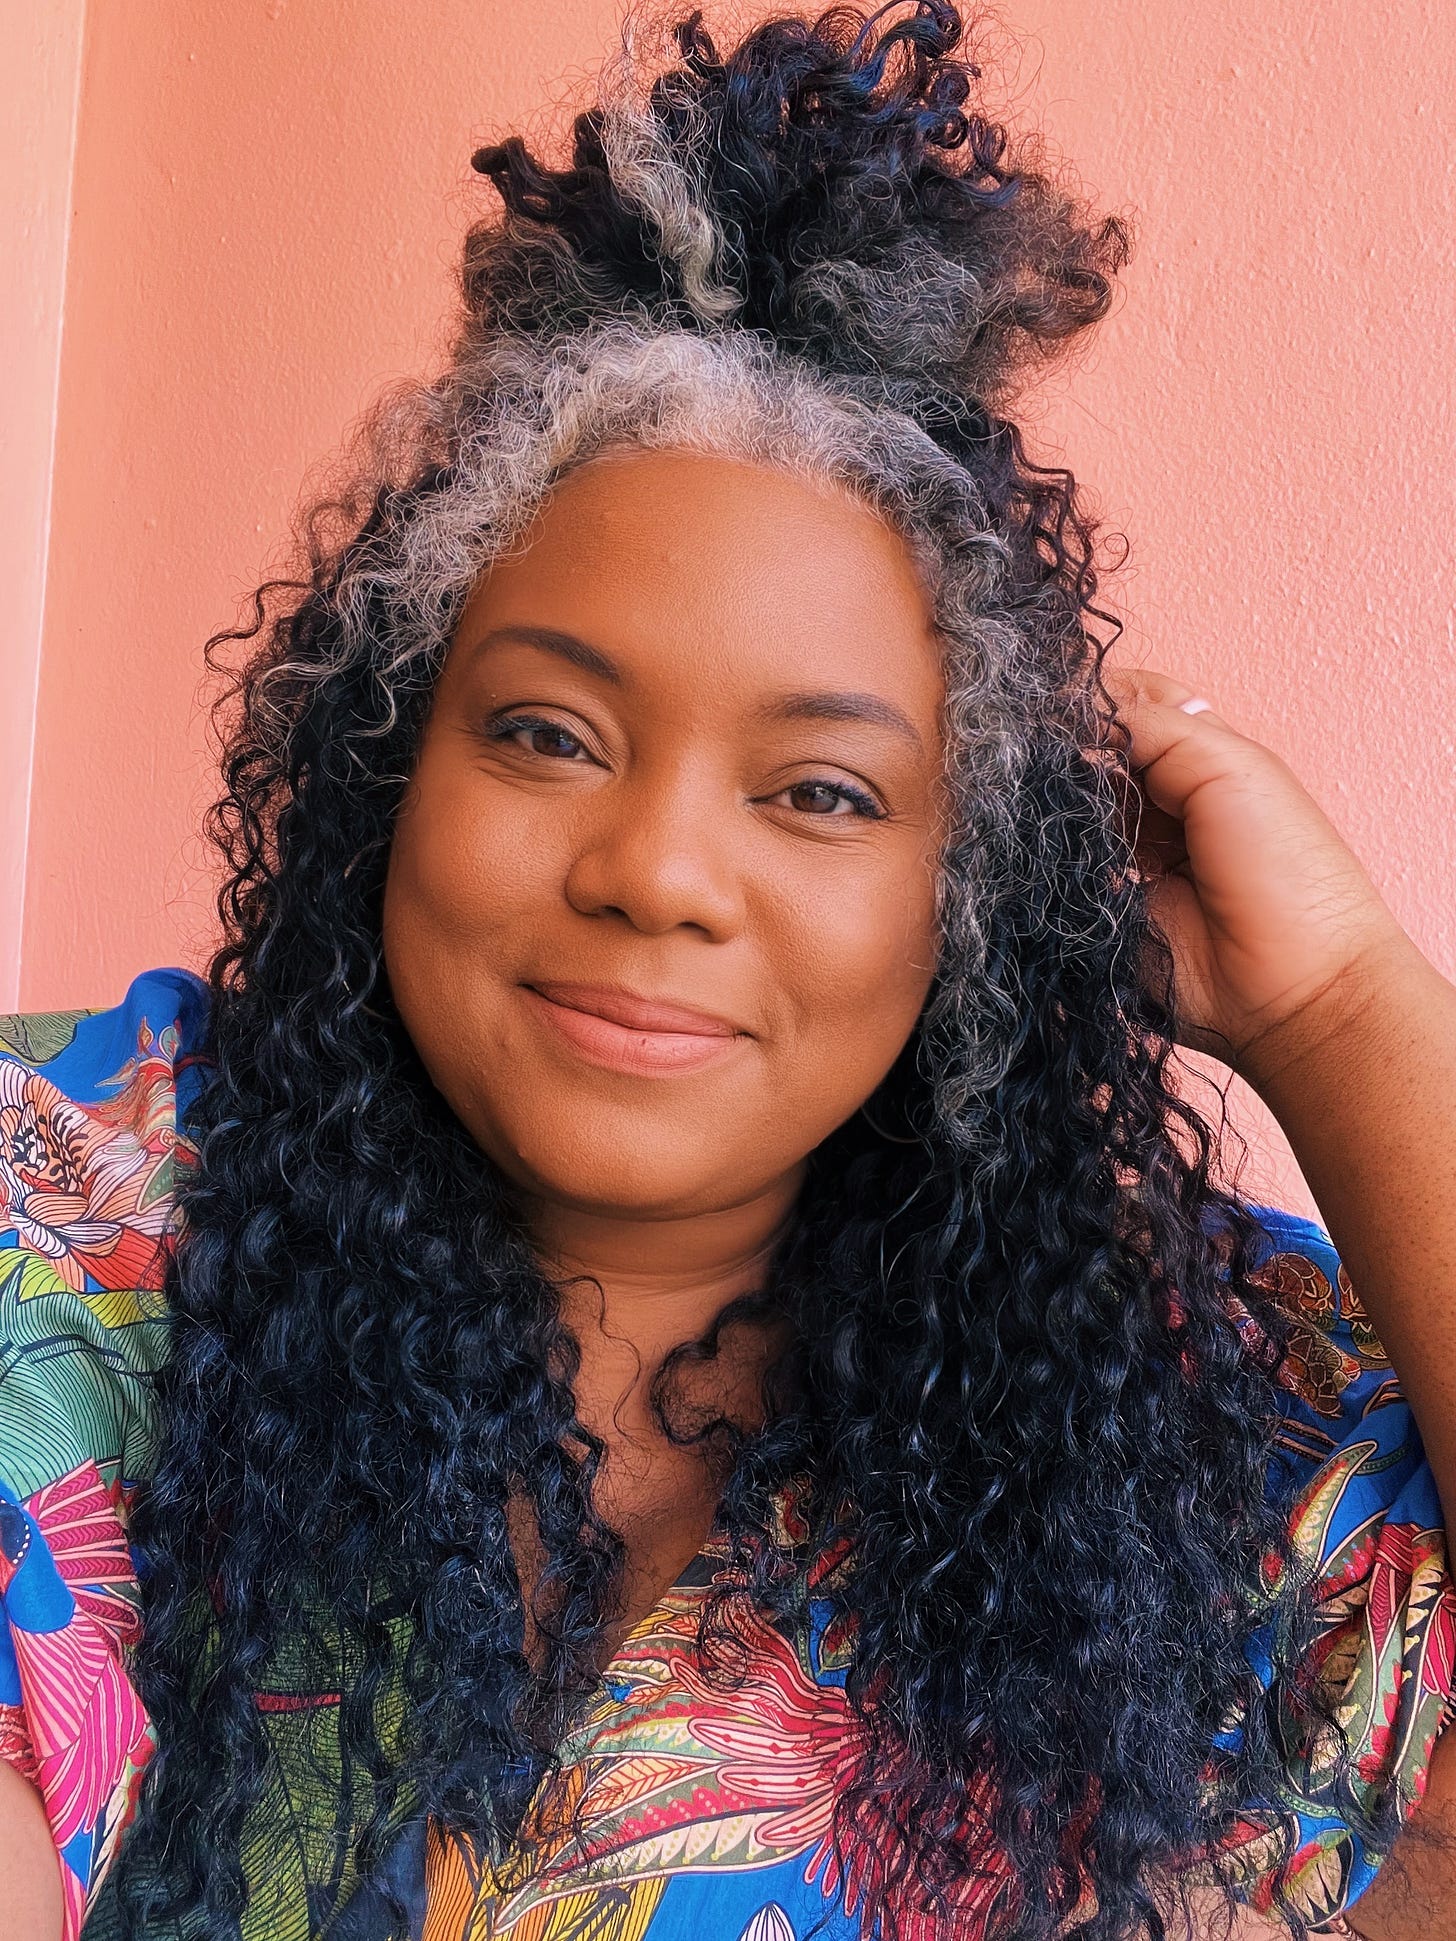 Morgan Harper Nichols smiles at camera. She is a black woman with curly black and gray hair wearing a colorful floral top.